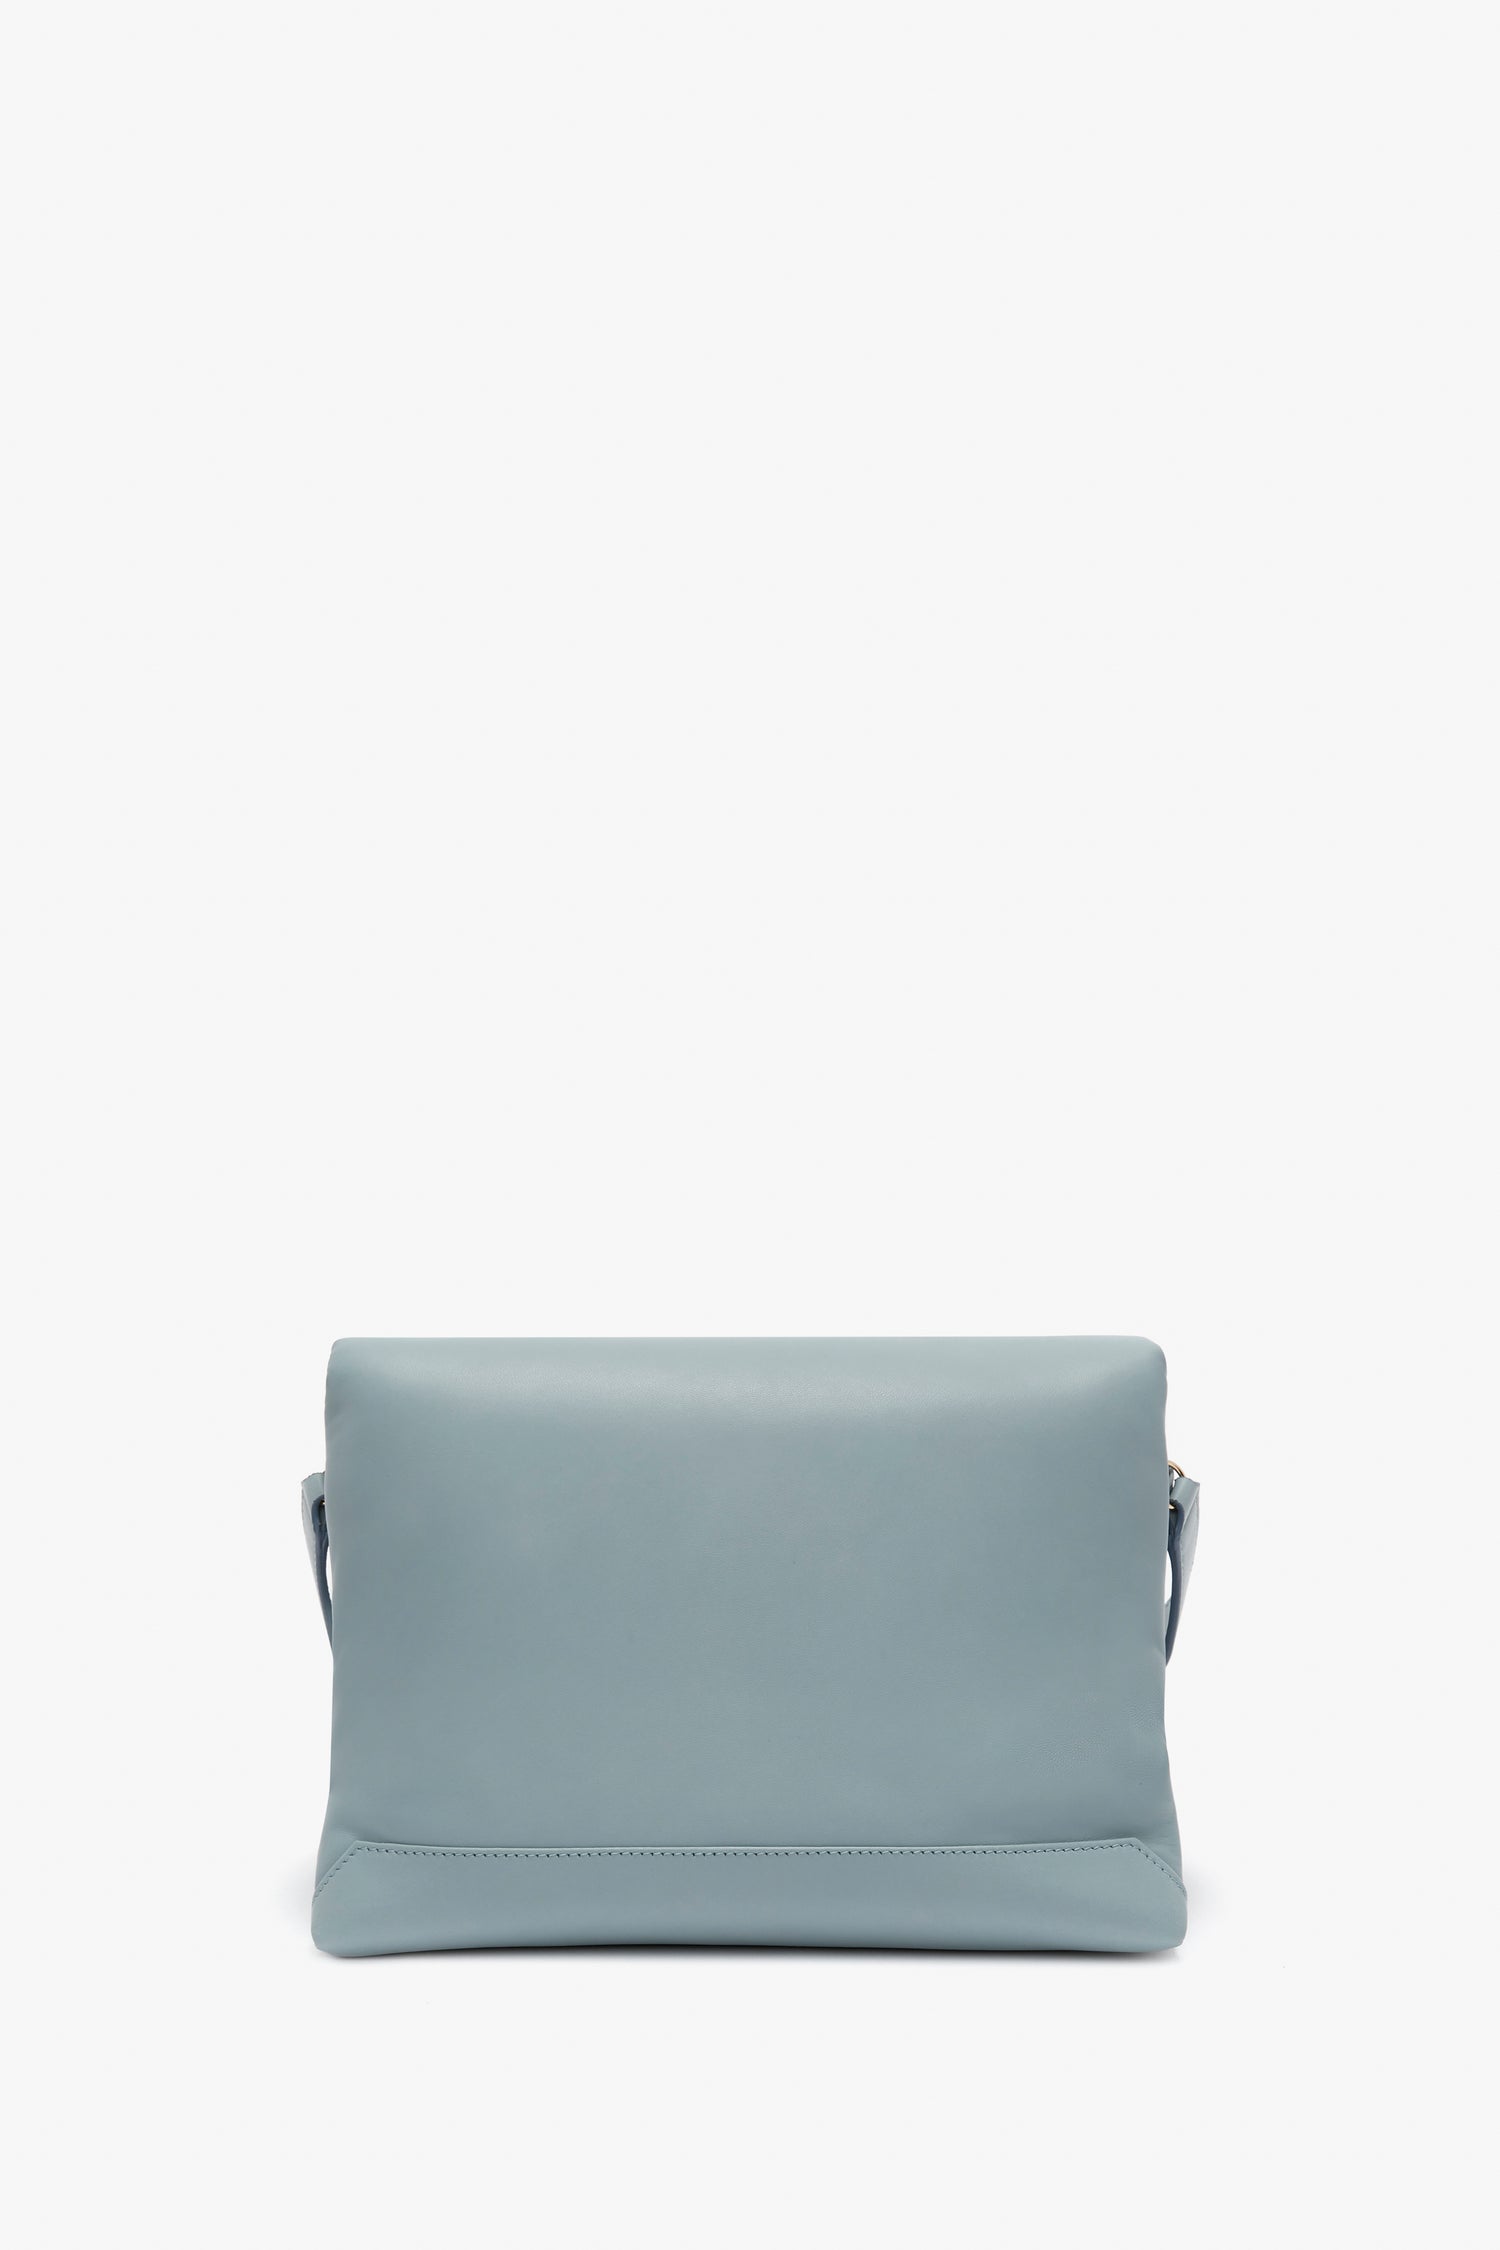 A Puffy Chain Pouch With Strap In Ice Leather clutch bag by Victoria Beckham, with a flap closure and a smooth finish, displayed against a white background.